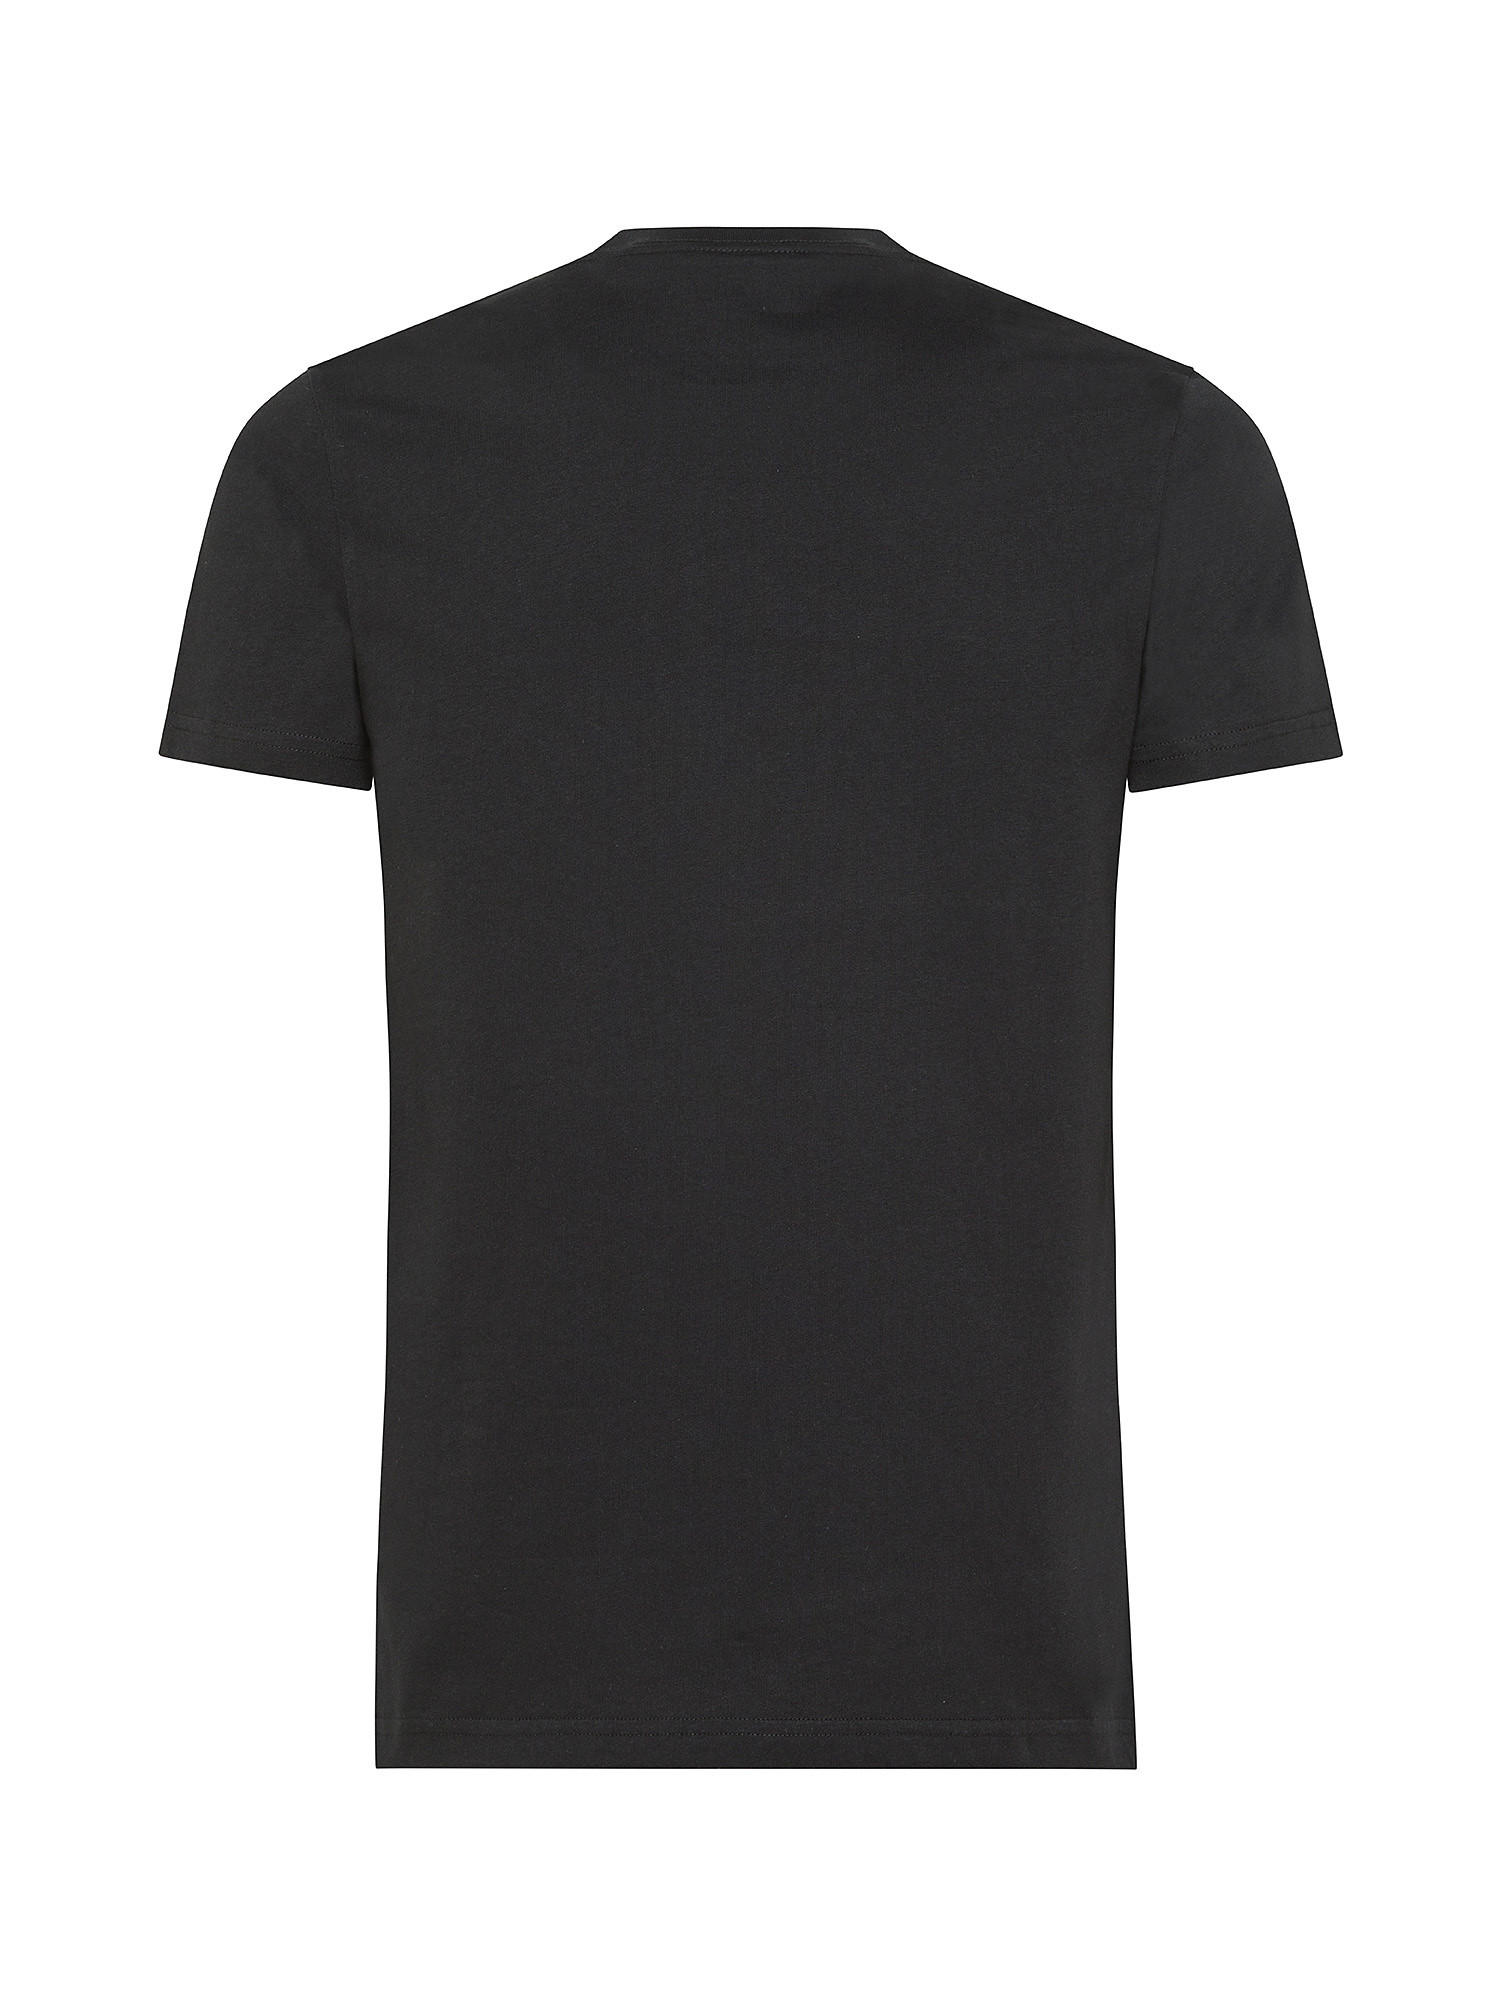 Paul Smith - T-shirt in cotone slim fit con stampa pennellate, Nero, large image number 1